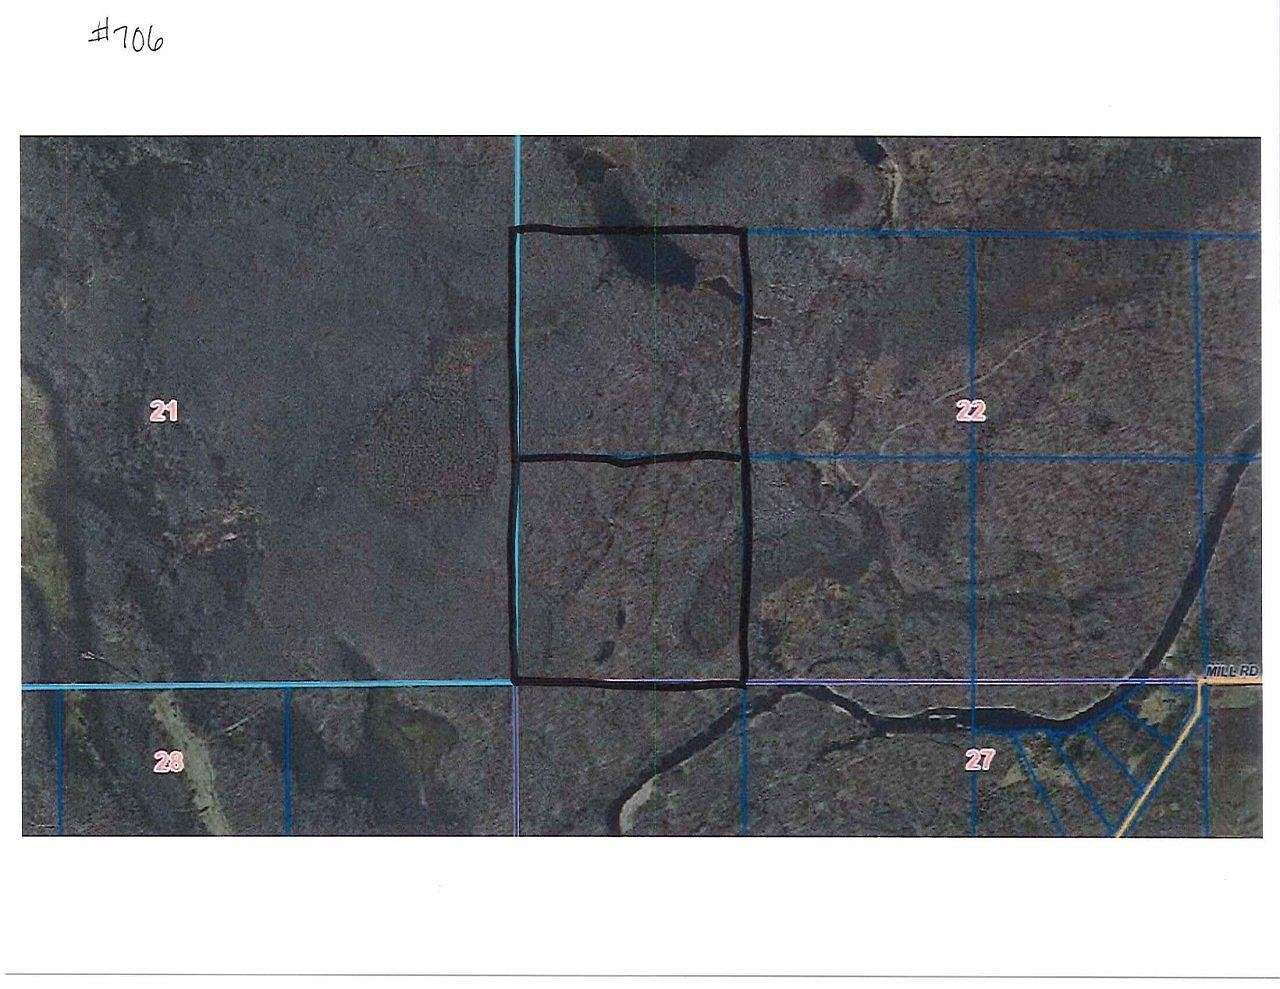 80 Acres of Land for Sale in Ogema, Wisconsin